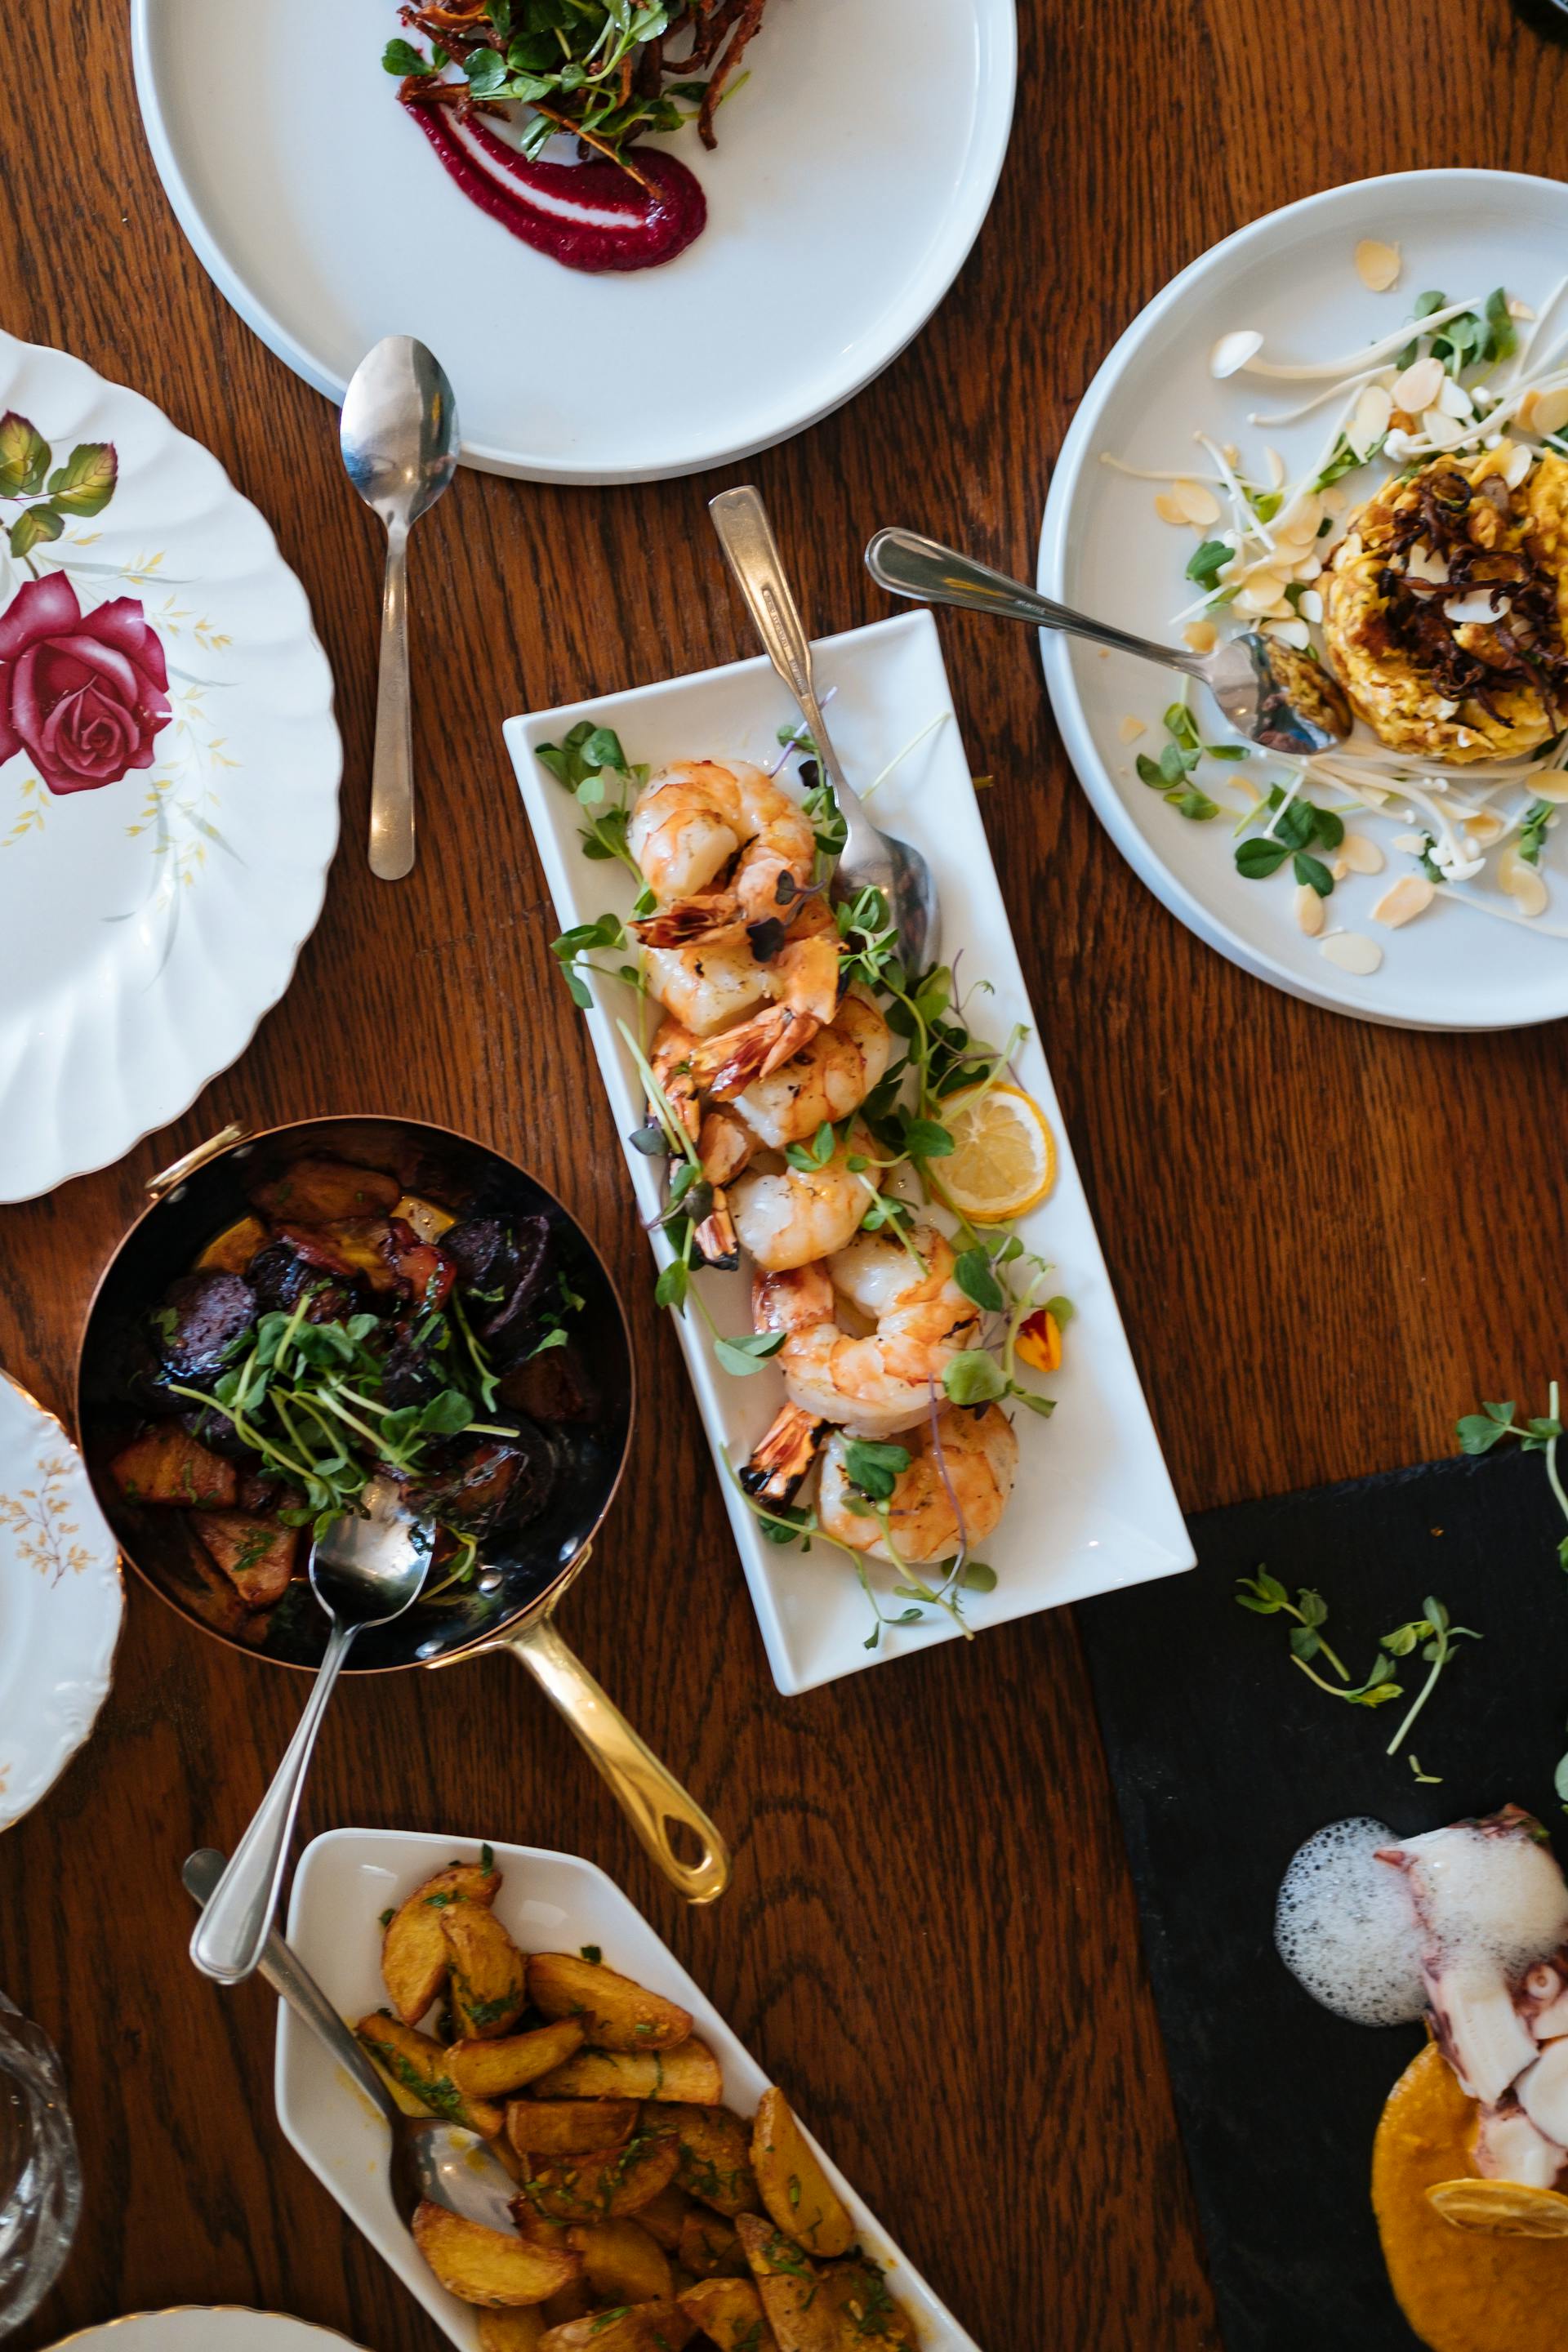 A table full of food | Source: Pexels